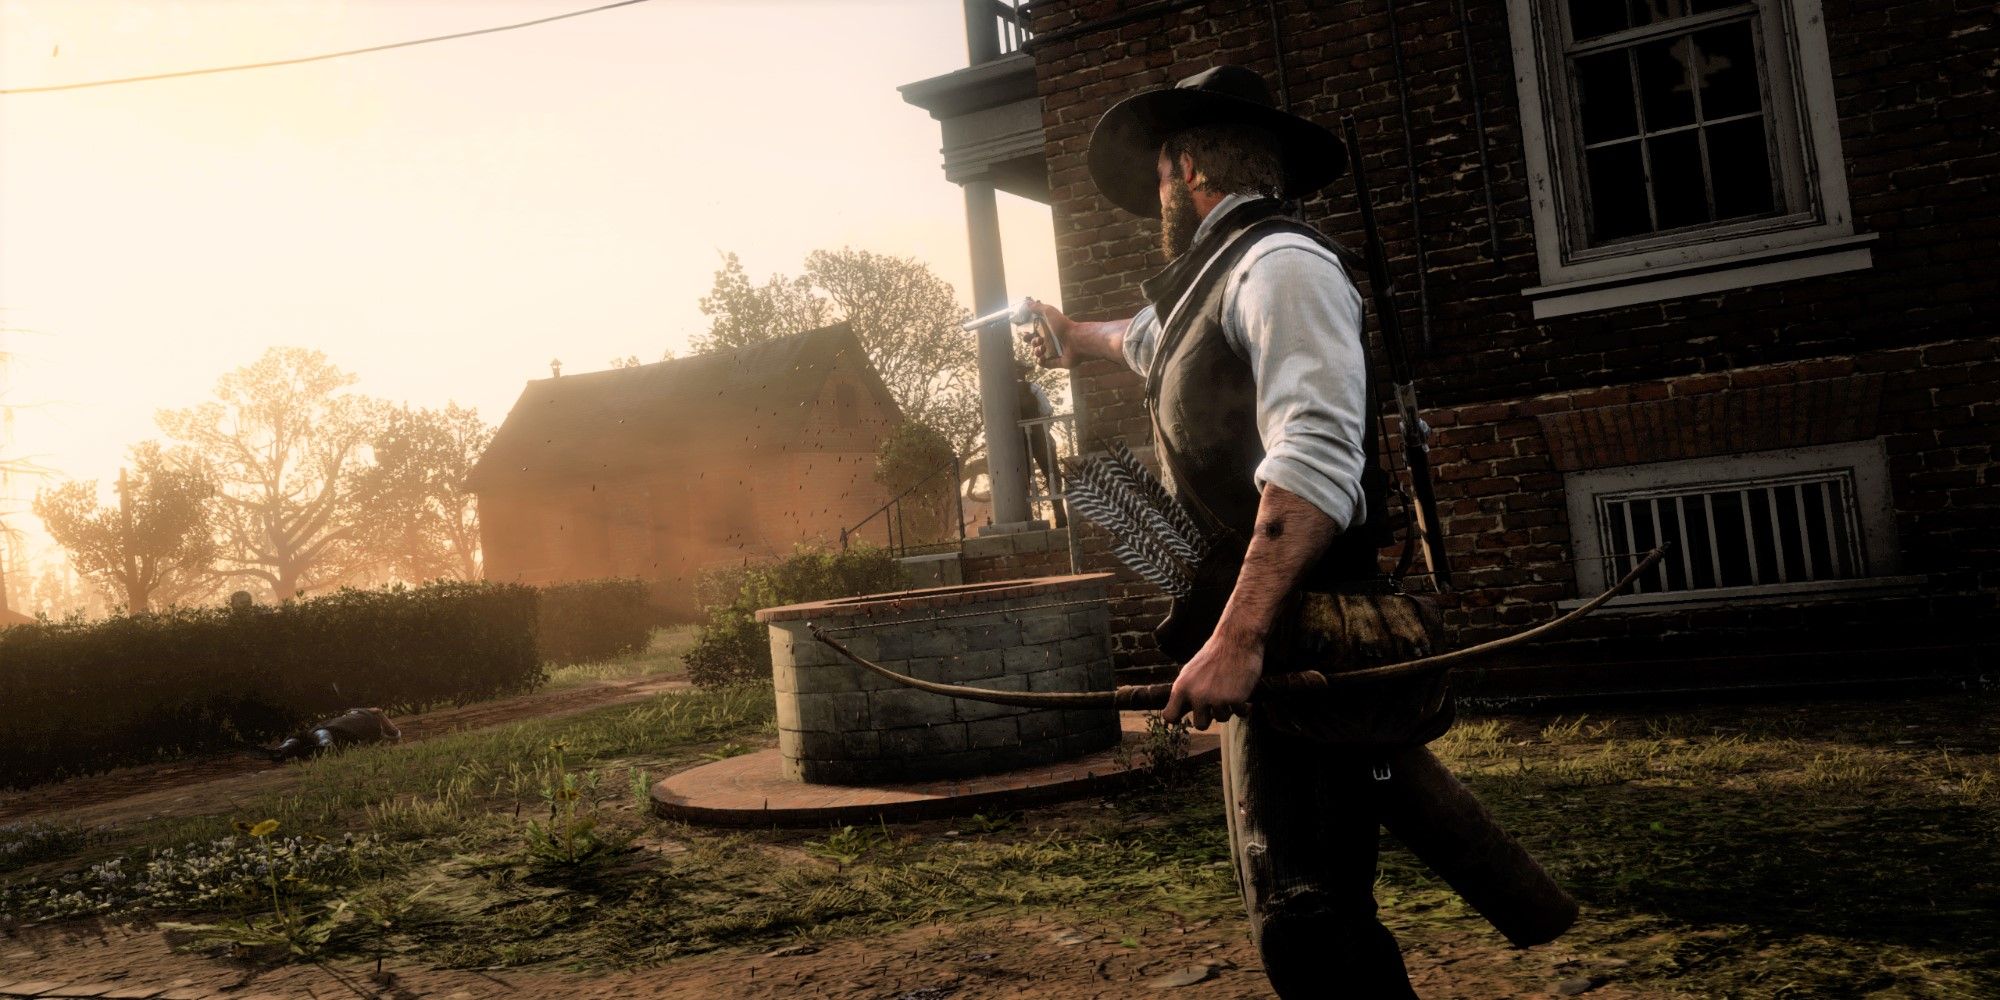 Mod image for Red Dead Redemption 2 that restores quivers that can be equipped on characters.